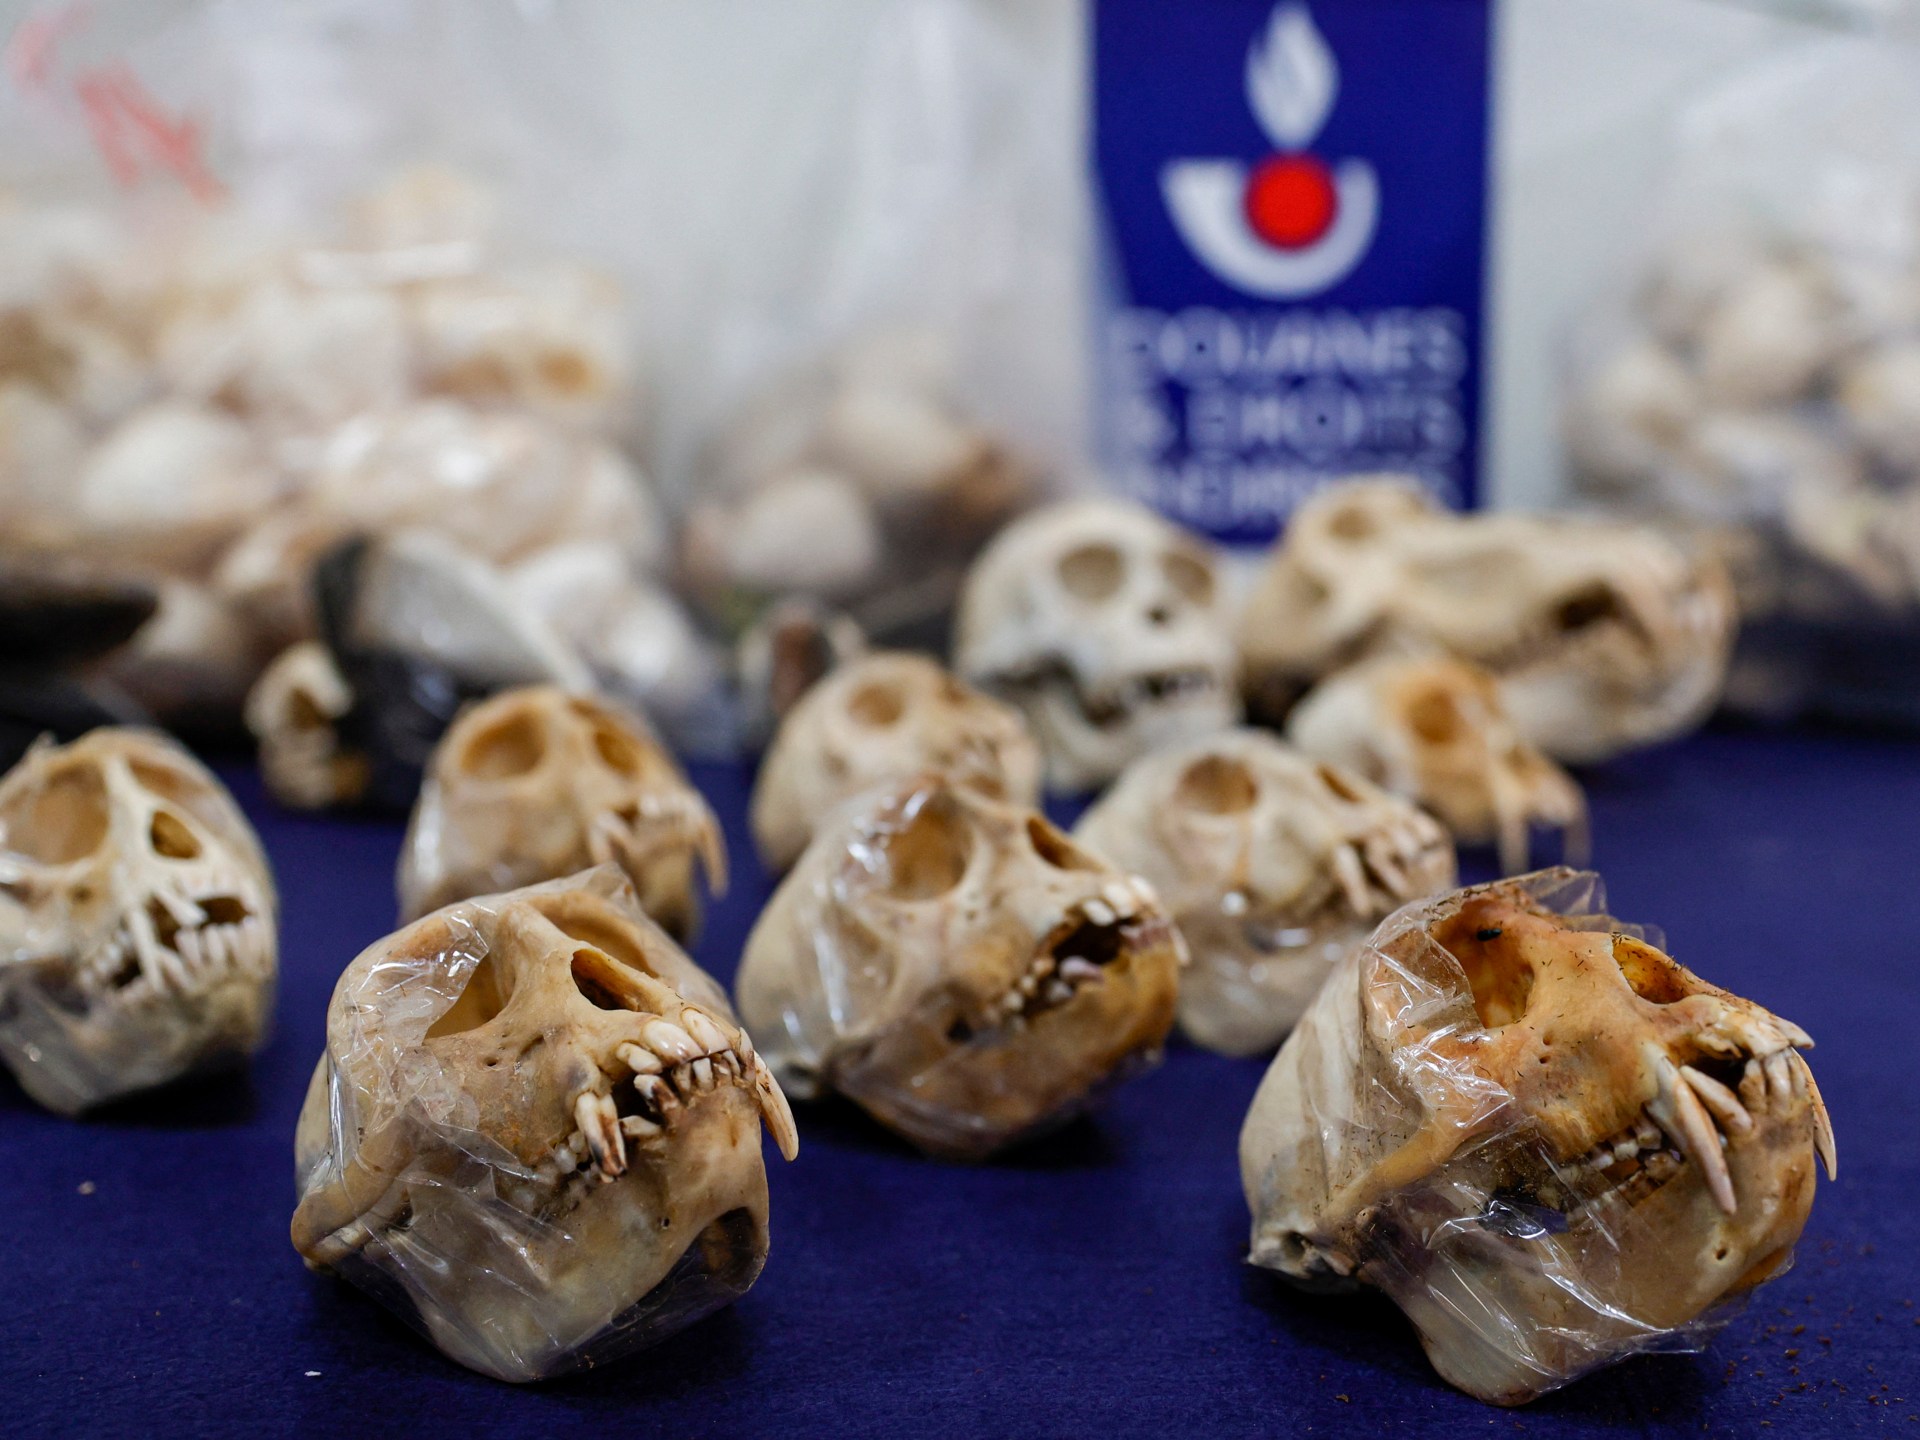 French customs seize nearly 400 monkey skulls destined for the US